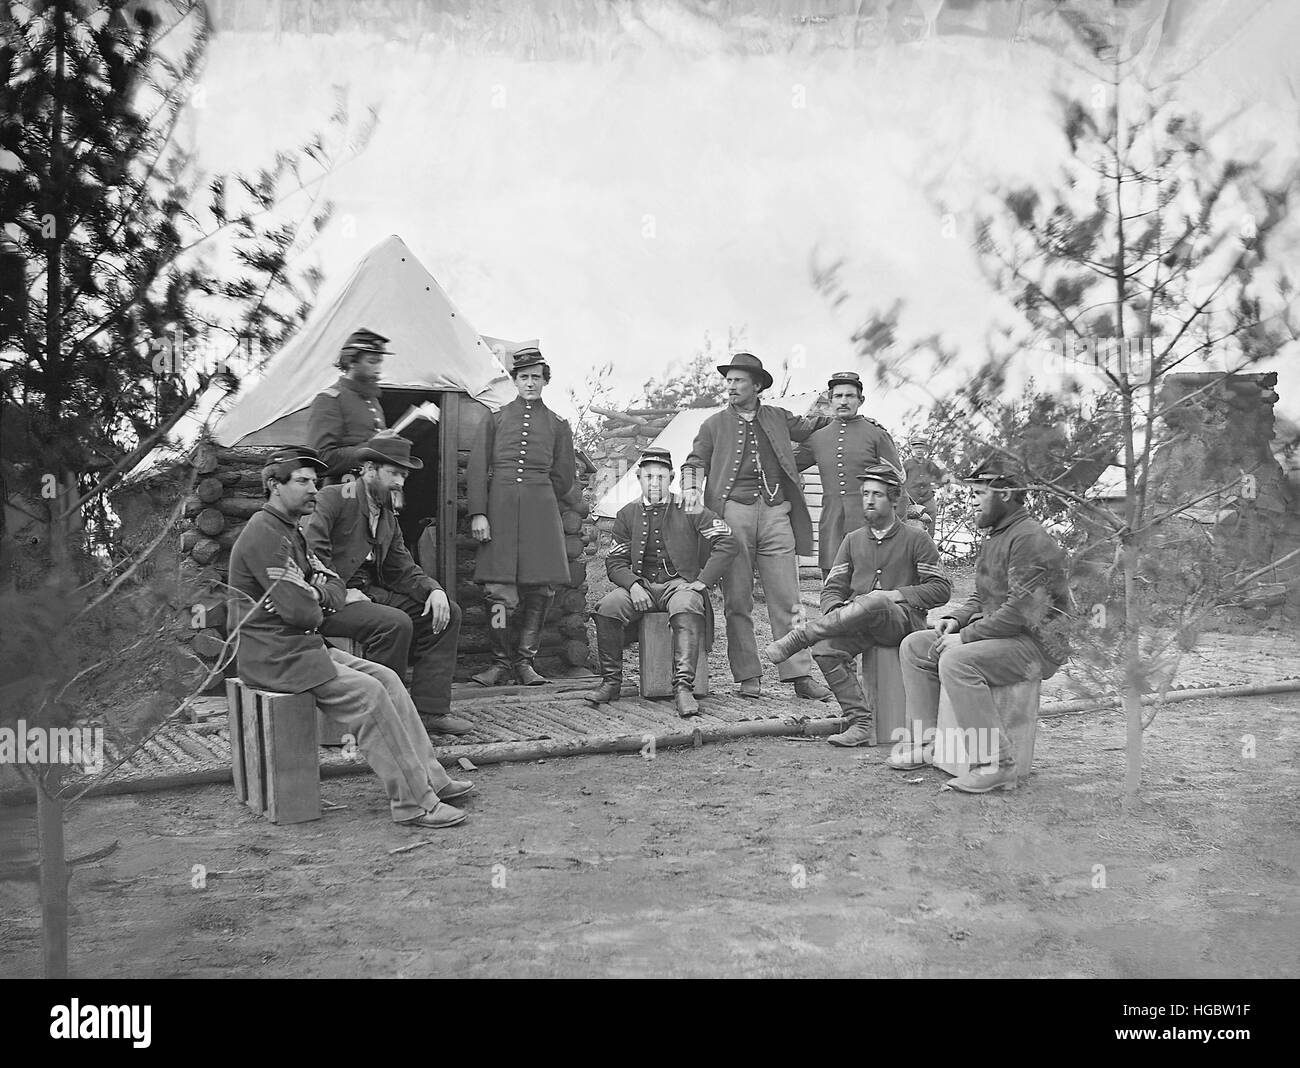 soldiers-at-camp-during-the-american-civil-war-HGBW1F.jpg